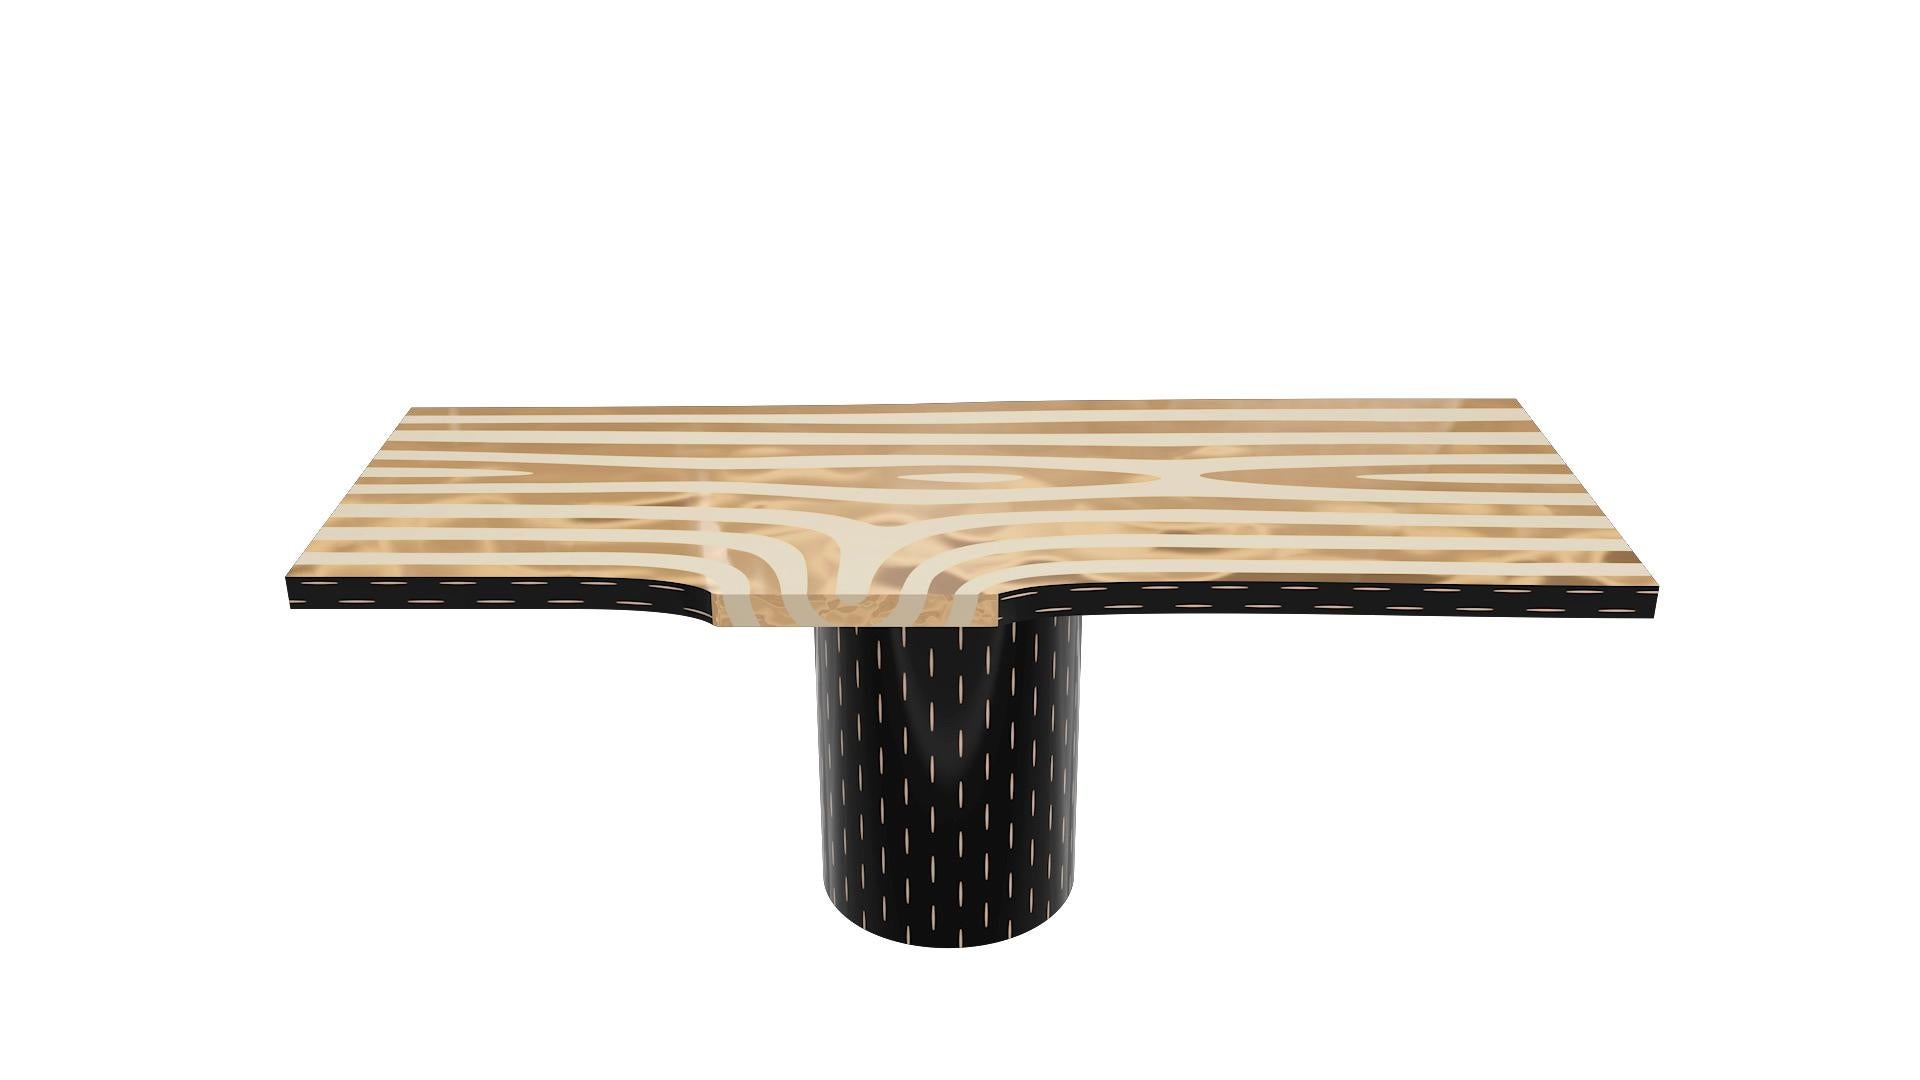 Brass inlay resembles the natural beauty of wood on the top of Forest Dining Table by Marcantonio, which is poised on a lovely handcrafted base with brass details.

For his debut creations, Marcantonio introduced “Vegetal Animal”, a concept that